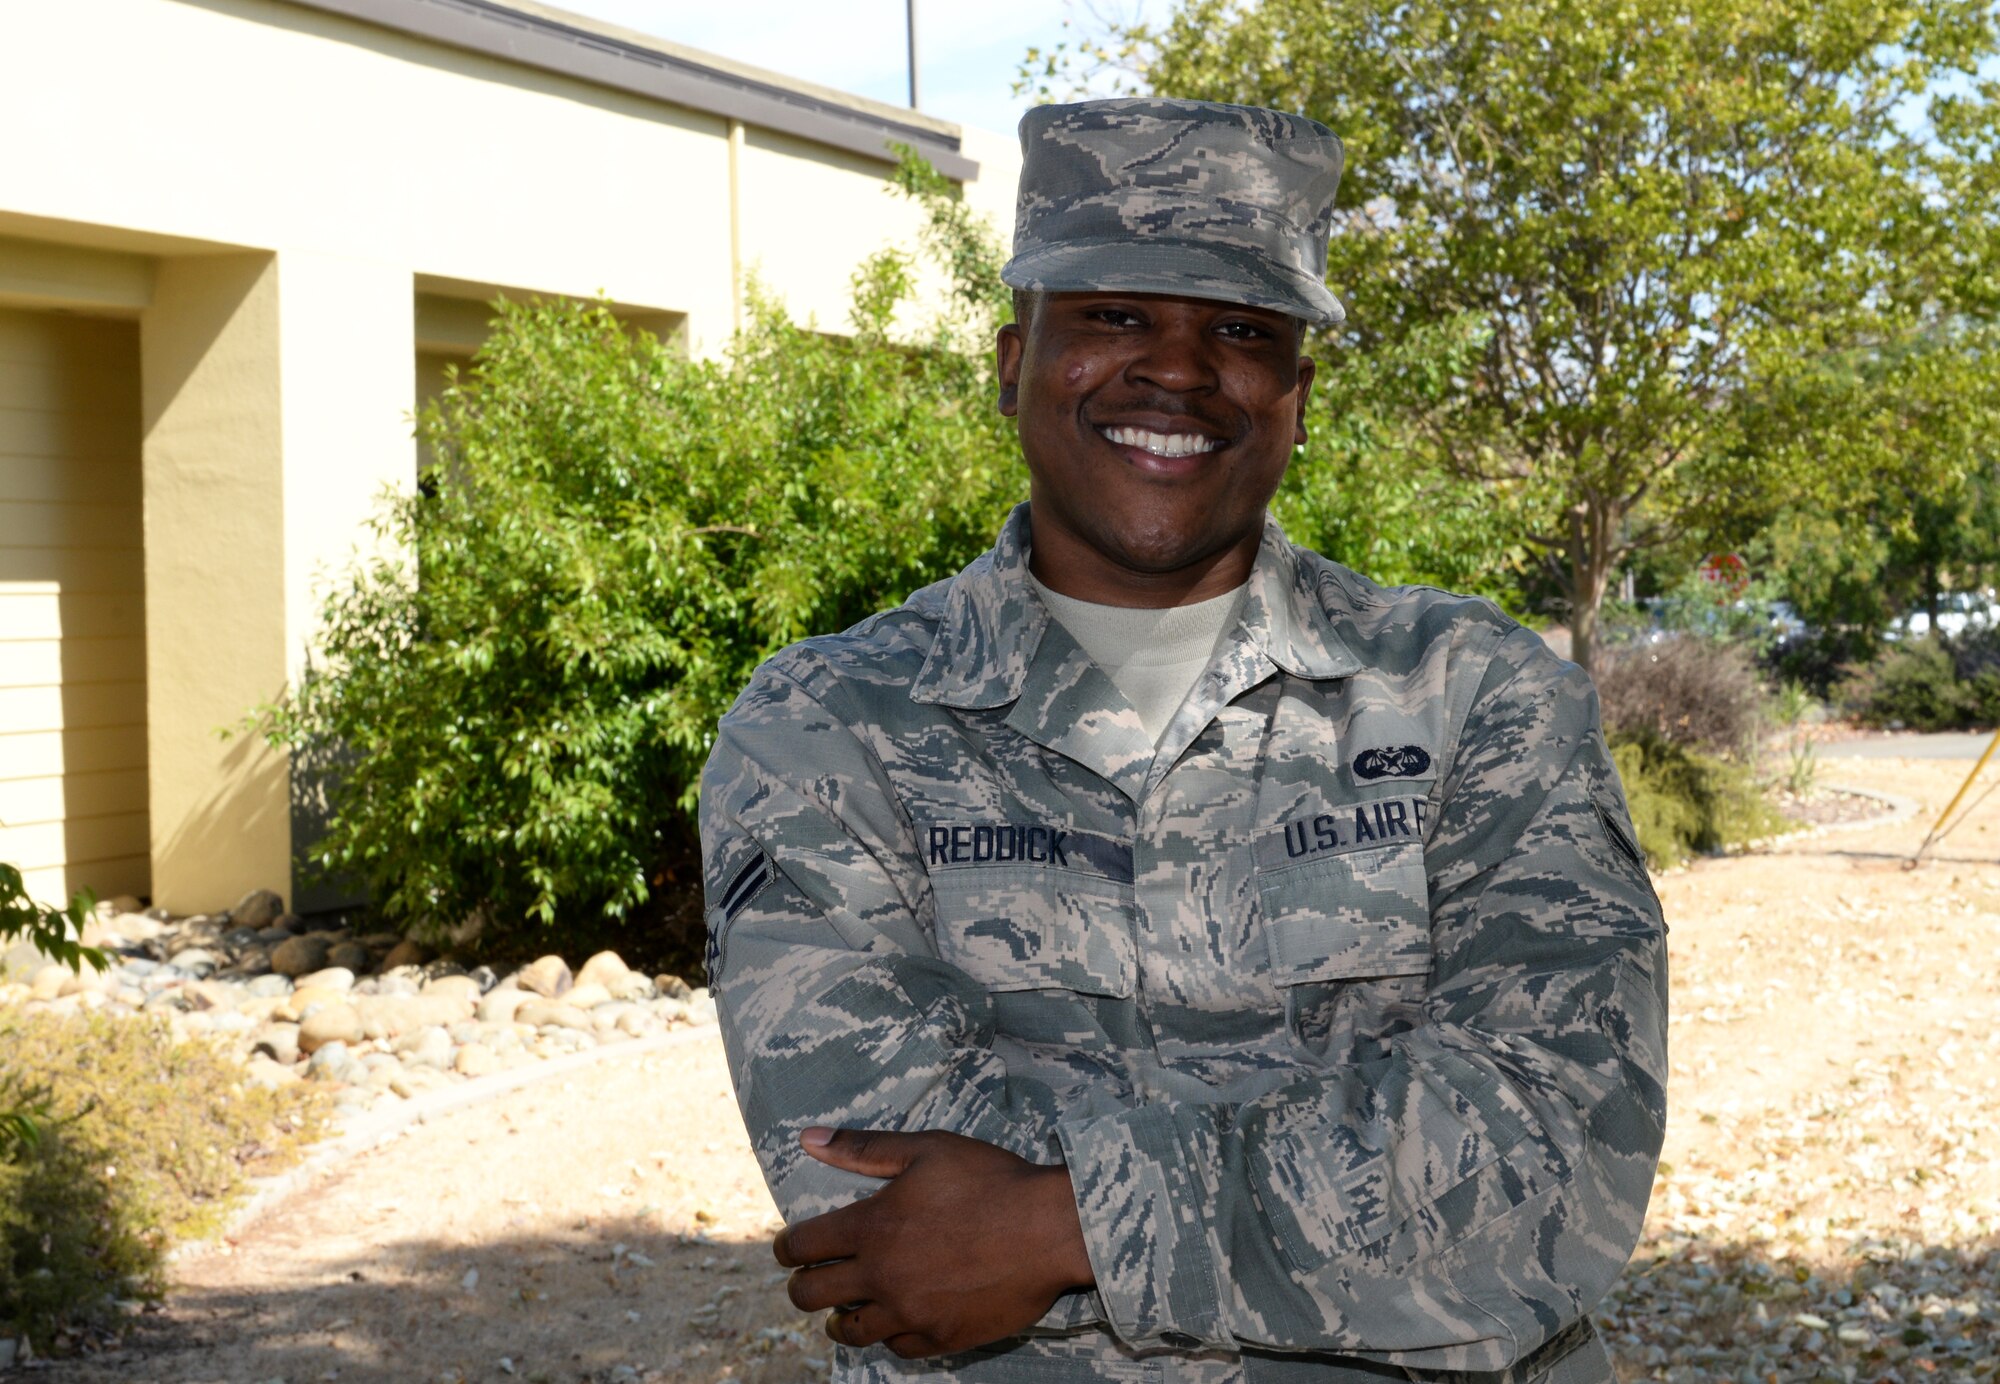 Airman 1st Class Willis Reddick, 9th Reconnaissance Wing Staff Judge Advocate civil law paralegal, poses for a photo July 7, 2015, at Beale Air Force Base, California. (U.S. Air Force photo by Airman 1st Class Ramon A. Adelan)